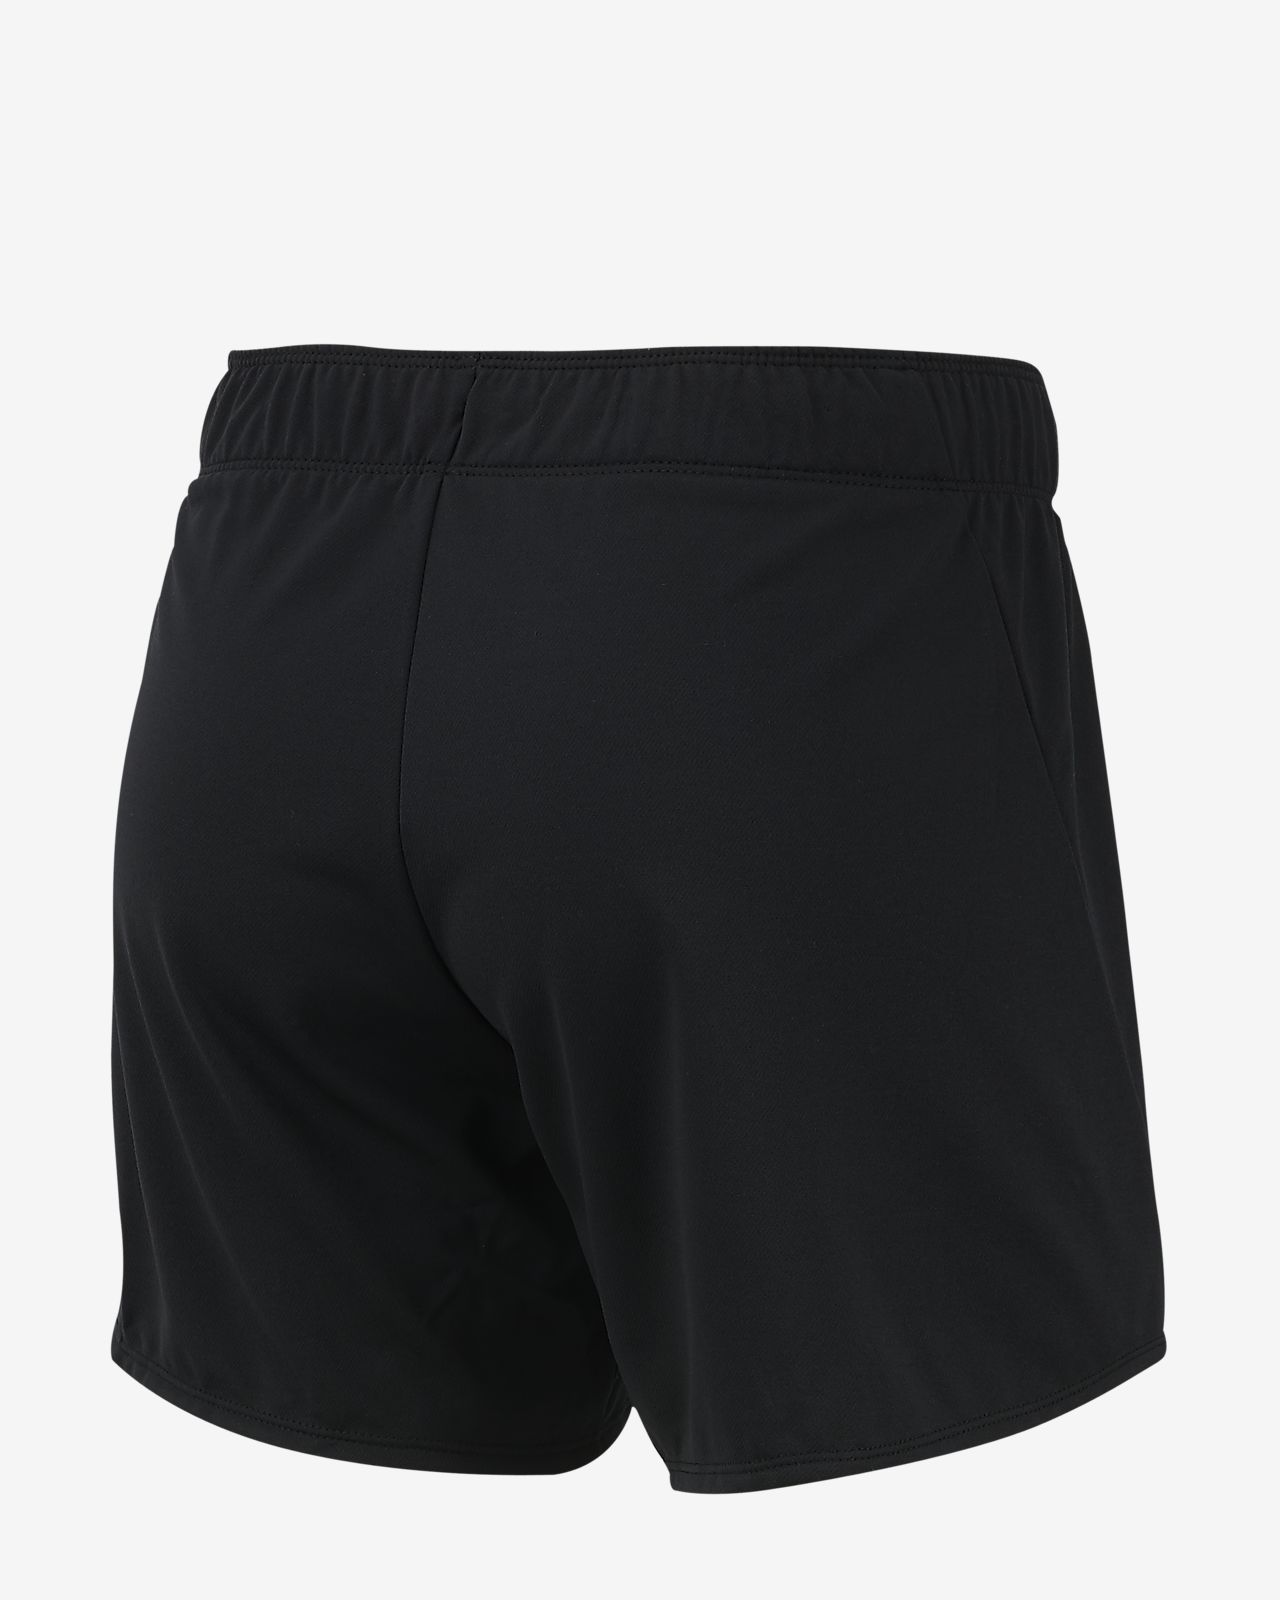 dri fit shorts with pockets